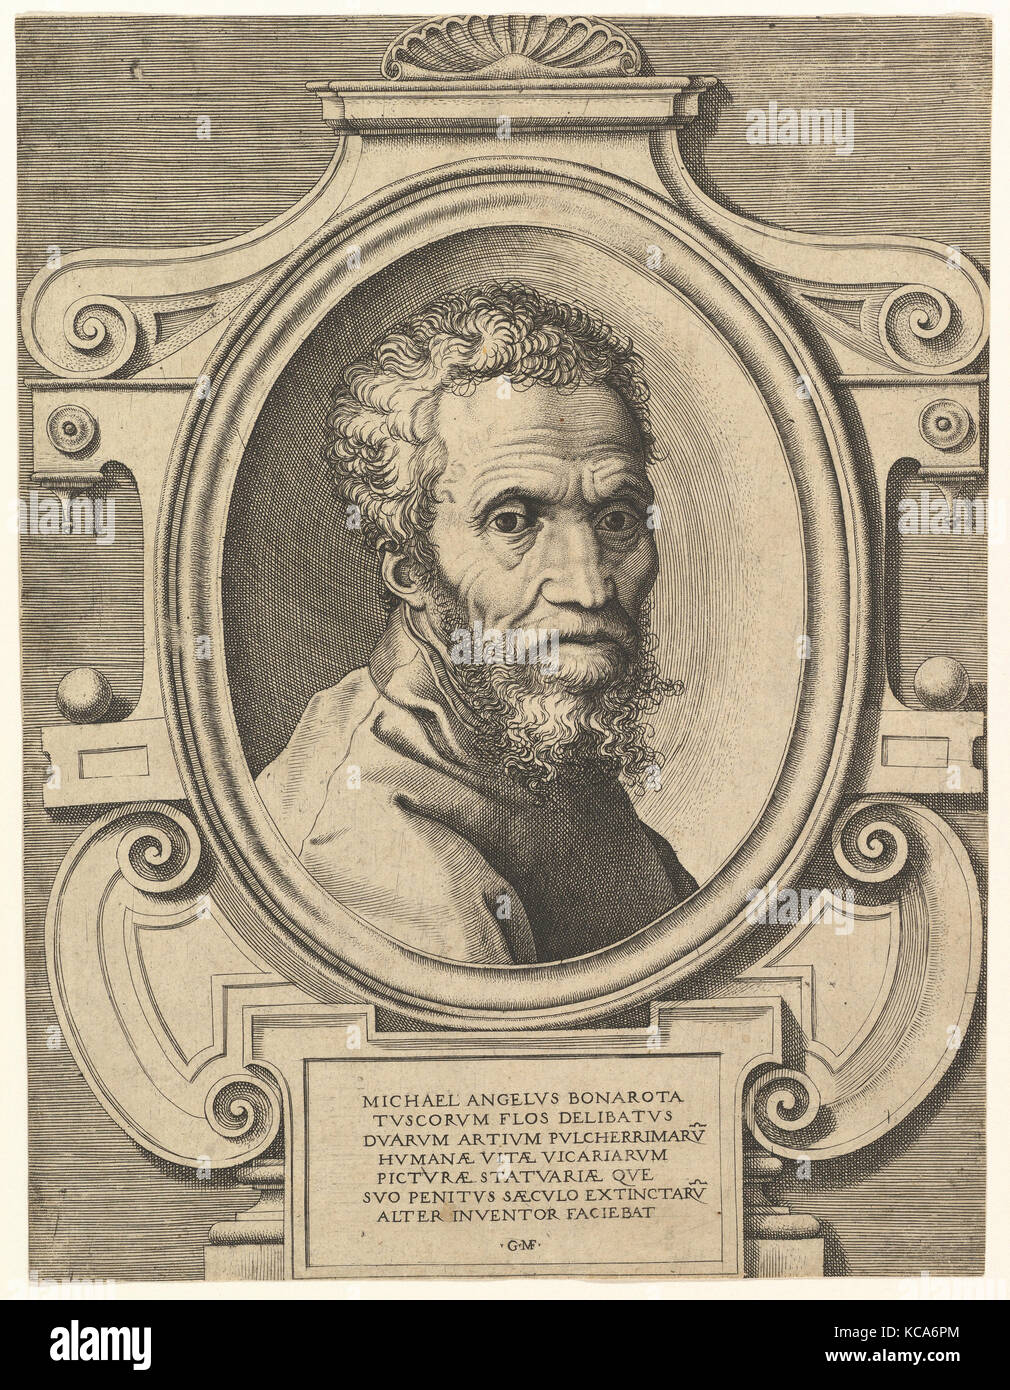 Portrait of Michelangelo, Engraved by Giorgio Ghisi, after 1564 Stock Photo